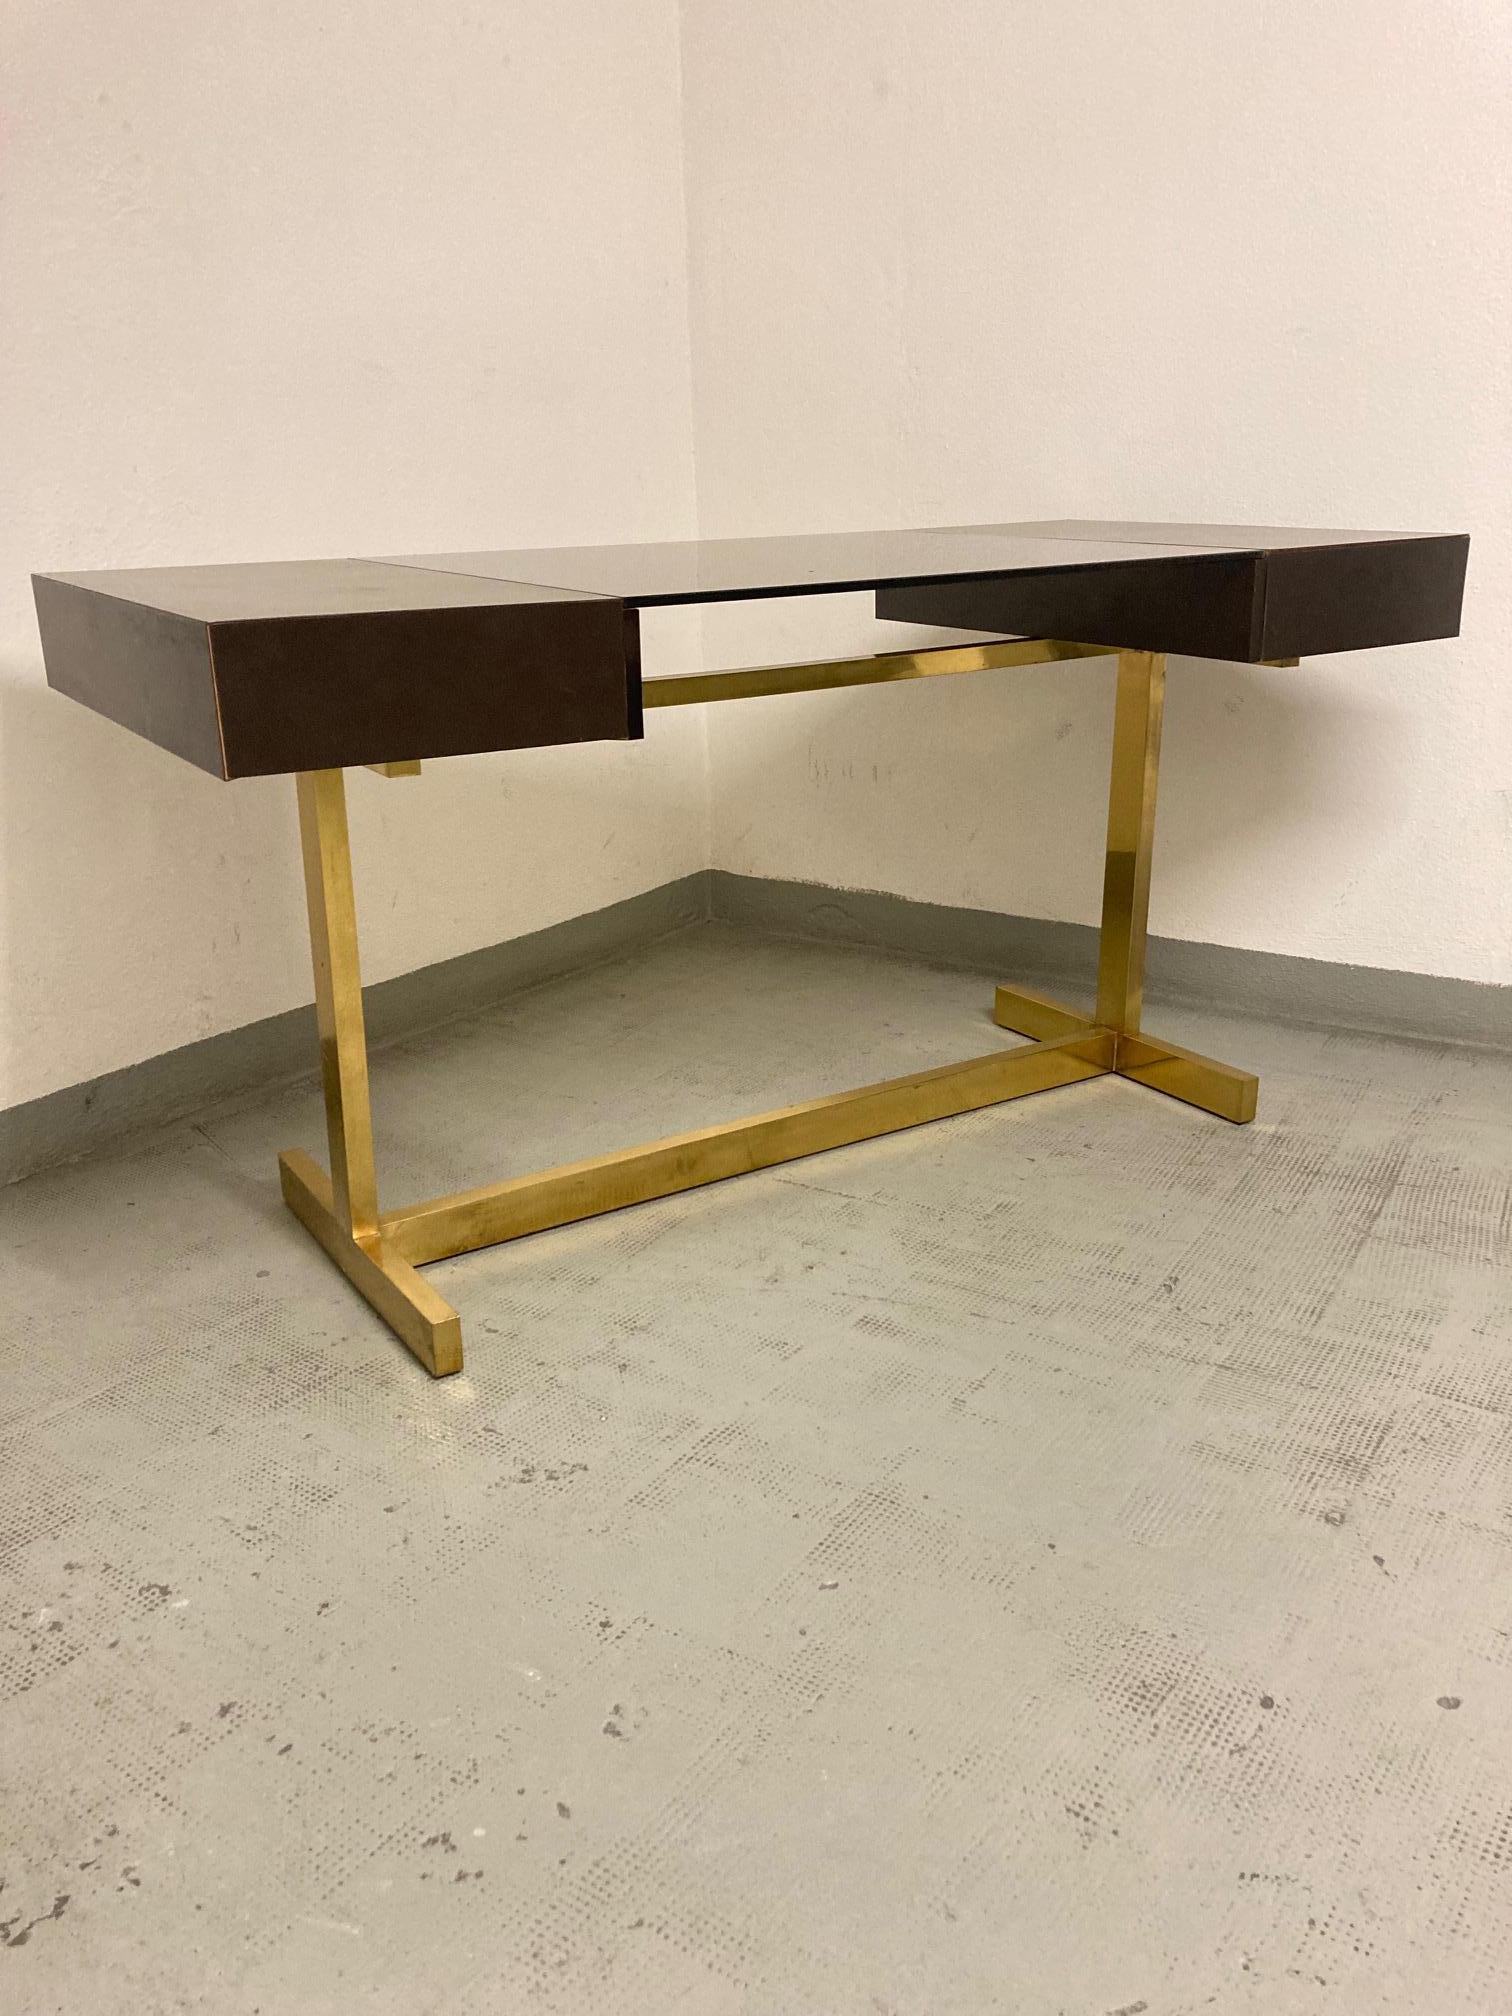 Italian Scrivania Brass & Lacquer Signed Writing Desk by Willy Rizzo, Italy, ca. 1972 For Sale